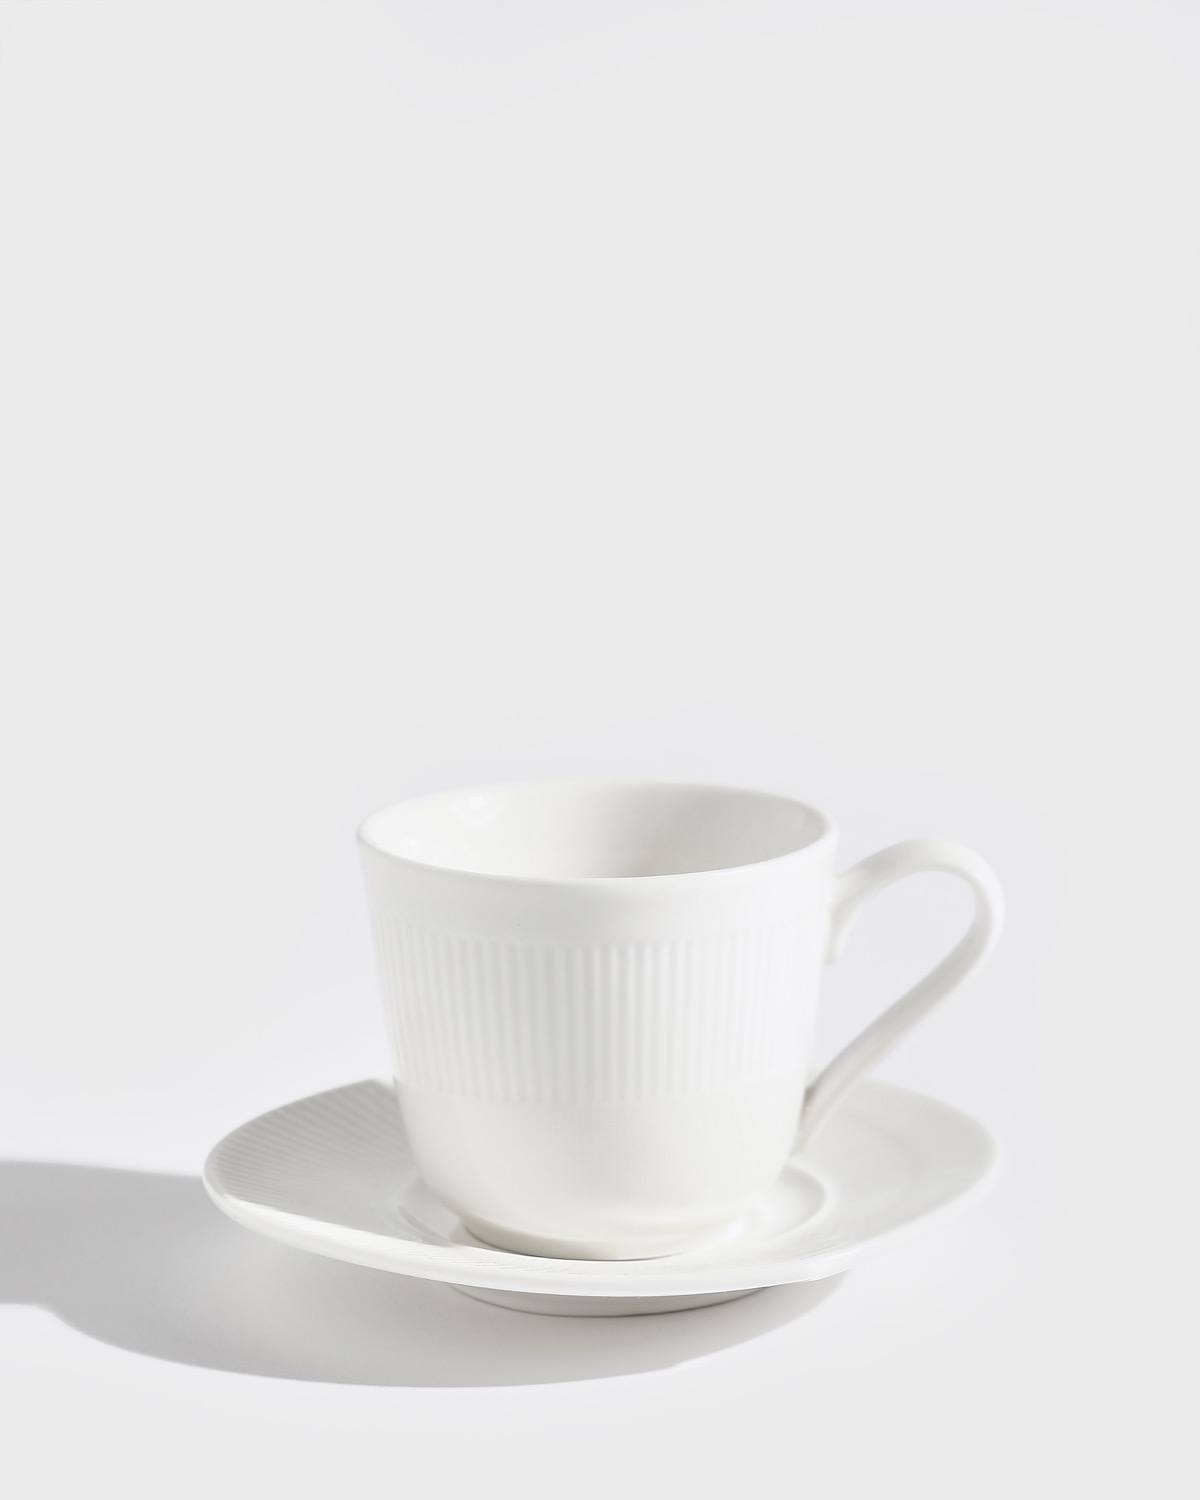 https://dunnes.btxmedia.com/pws/client/images/catalogue/products/5434108/zoom/5434108_white.jpg